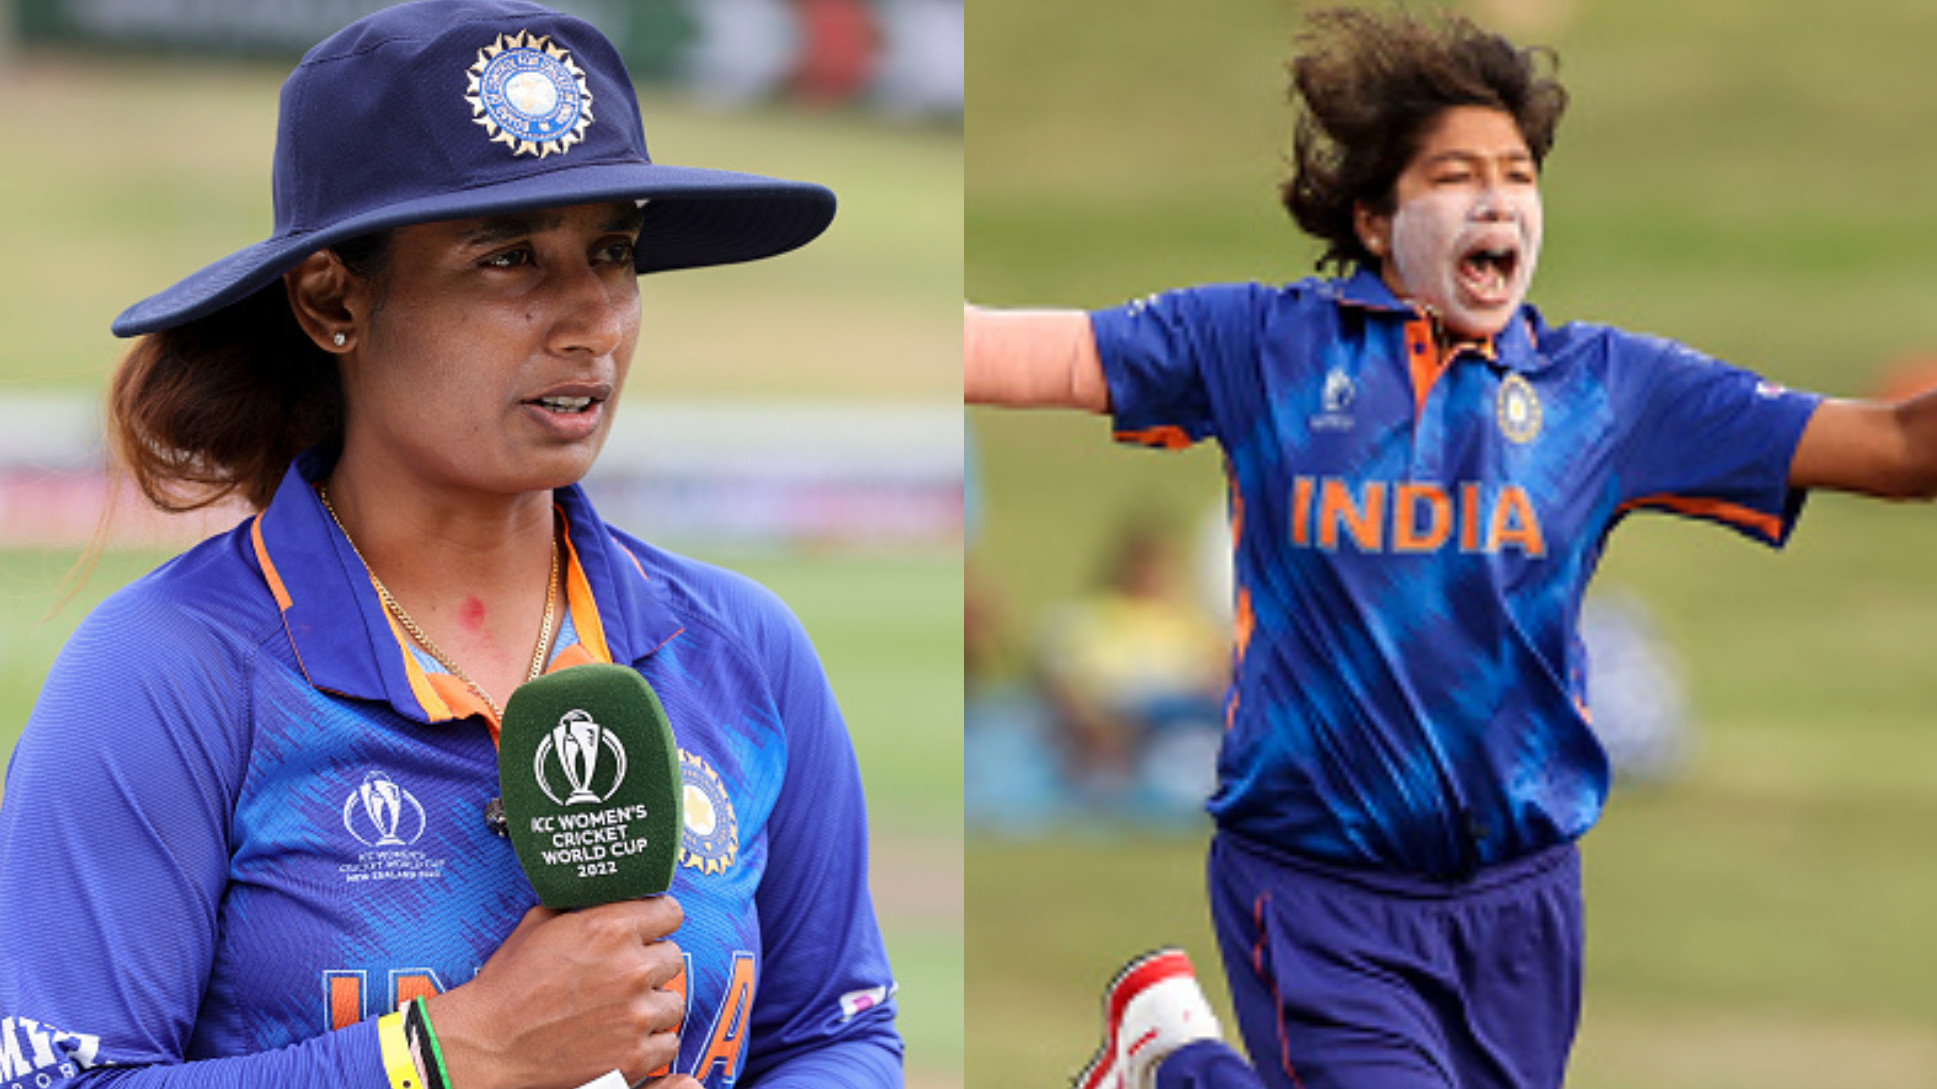 CWC 2022: Mithali Raj, Jhulan Goswami achieve major World Cup records in India's impressive win over West Indies